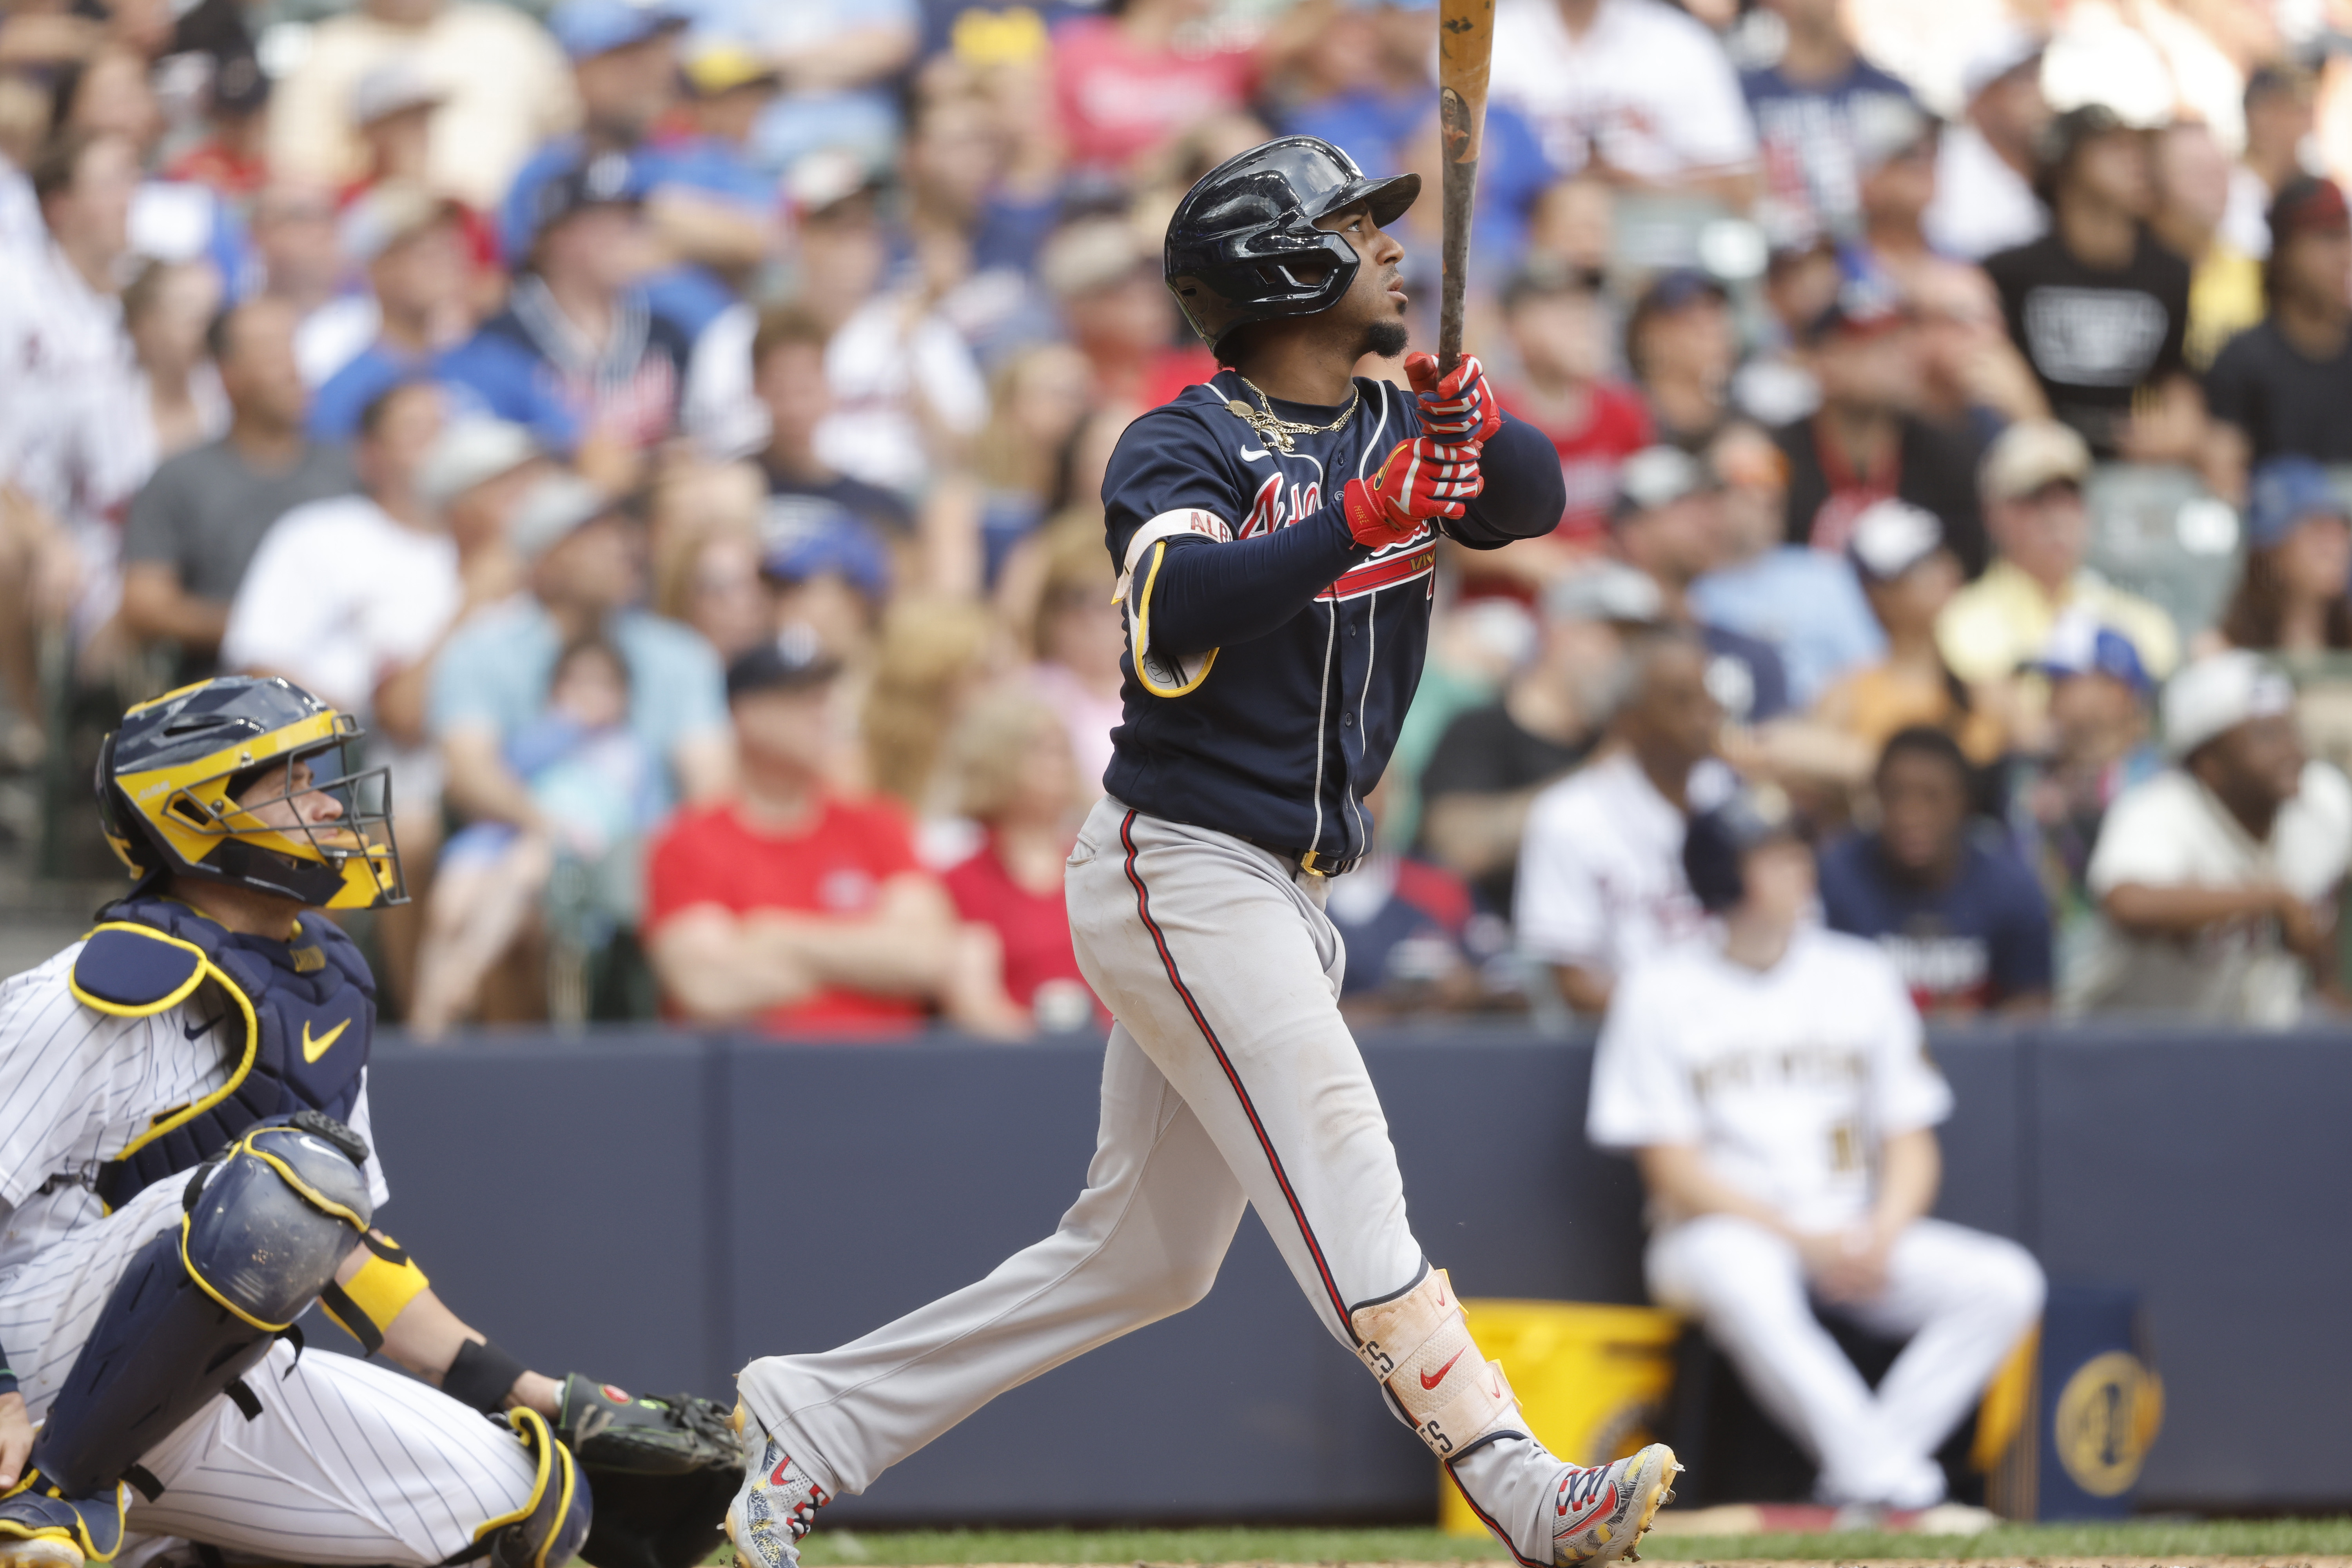 When Will Ozzie Albies Be Back, Return To Braves? Injury Update